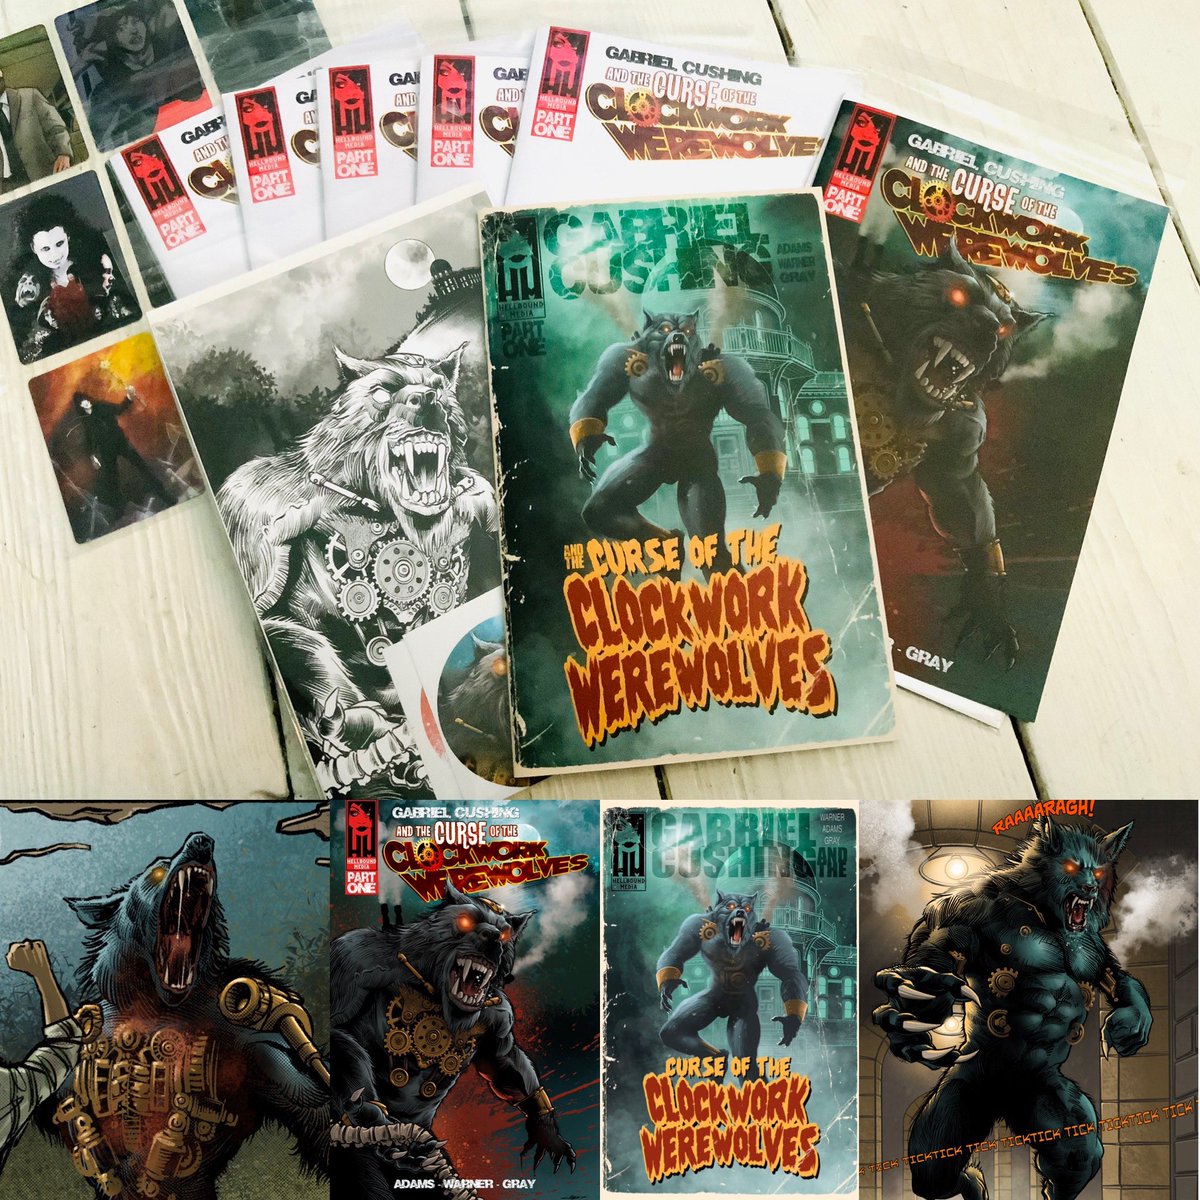 Comps arrived the other day. #clockworkwerewolves came out amazing. Very happy with it all. The books, the prints, stickers… Everything! Nice one team @HellboundMedia